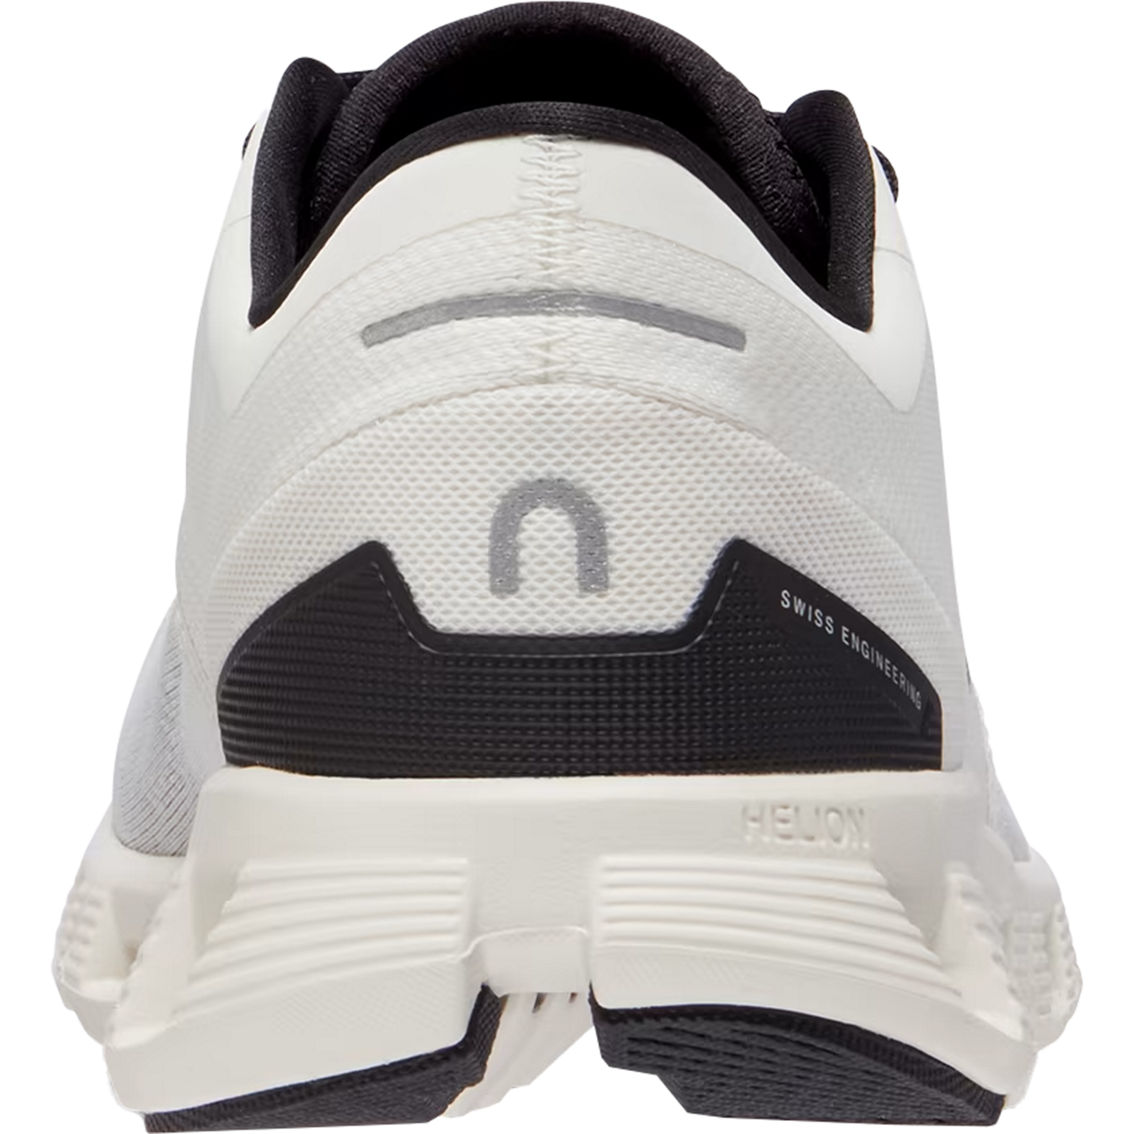 On Women's Cloud X 3 Running Shoes - Image 6 of 6